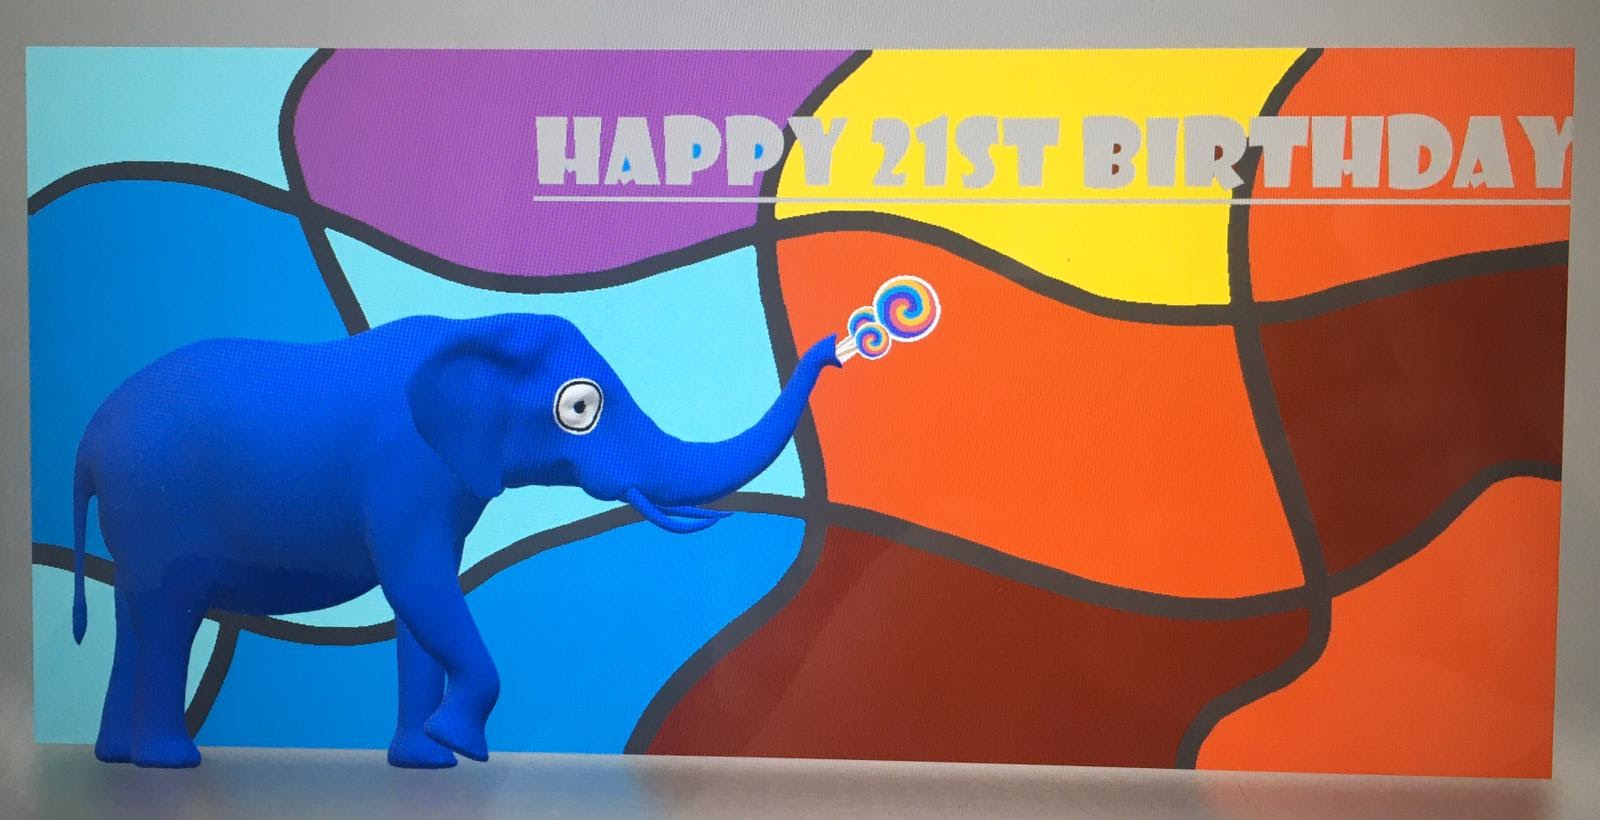 Digital entry reading Happy 21st Birthday with a image of an elephant coloured blue on the left hand side